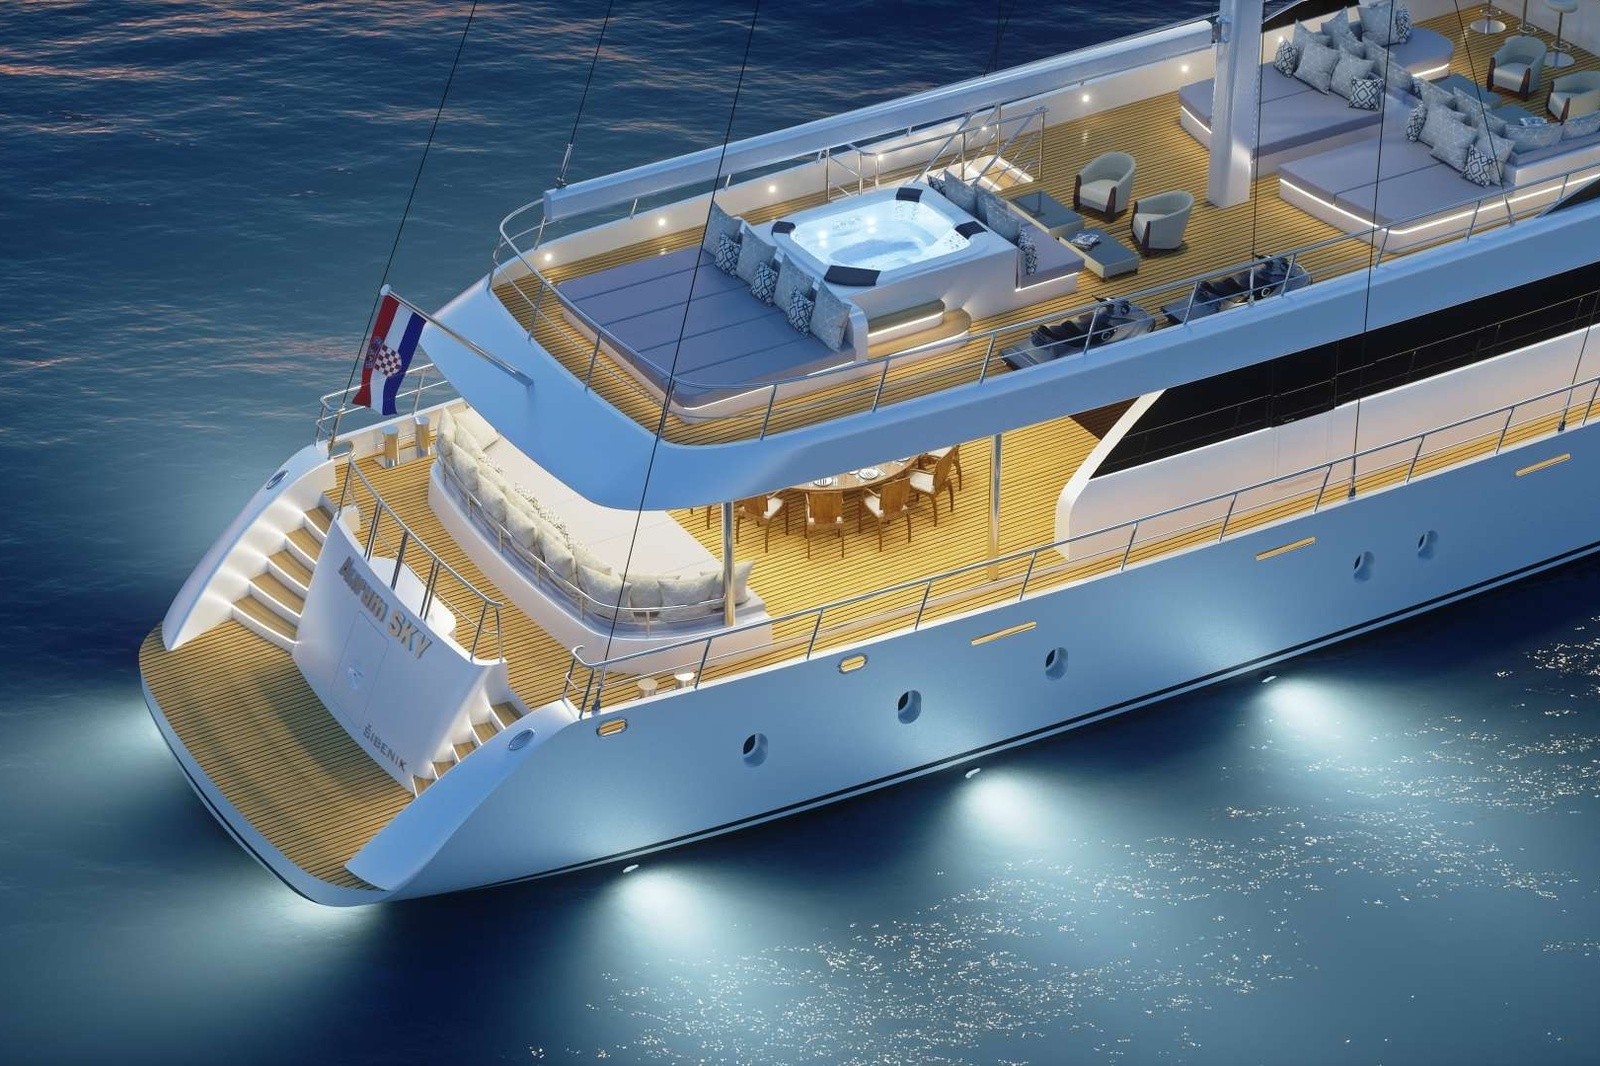 Launched in May 2020, this new luxury crewed motor sailer is available for charter along the stunning Adriatic coast, appointed central agency. Aurum Sky is by all means, a unique yacht on the charter market. At 43.5 meters, she offers expansive space in all areas. She accommodates up to 12 guests in 6 double en suite cabins. The cabins range in size between 20 m2 and 25 m2, and two can be converted to twin cabins. Equipped with a Smart TV/DVD, fridge, safe, Intercom, WiFi Flat 3G/4G, and with room service on option, the cabins allow for an entire private and personalized guest experience.

The elegant lounge extends to the stern dining area with a table for twelve, altogether nearly 100 m2. The flybridge of 120 m2 comprises a sunbathing area and a Jacuzzi to immerse you in relaxation and stunning vistas.

Aboard Aurum Sky, all your daily rituals are bound to be even better! Find a large Smart TV, DVD, USB iPad/iPod/mobile docking station in the saloon, while the upgraded sound system links to the flybridge and cabins. Read your press in the library, get business done efficiently in the privacy of the office. And for action and adrenaline, Aurum Sky packs a plethora of the top-notch water toys and equipment such as two jet skis, 2 Seabobs, adult and junior water skis, SUPs, fishing equipment, kayaks. More toys are available as extras.

Top of the hospitality aboard M/S Aurum Sky is provided by the highly experienced and professional crew of 8 which consists of the Captain, Chef, Engineer, Chief officer, Deckhand, Chief stewardess and  second stewardess and third stewardess . Your Captain will primarily care for your safety, and will also tailor your itinerary, so you discover many secluded gems of the Adriatic coast. Your Chef will prepare healthy Mediterranean specialites from fresh, local and seasonal ingredients, and if you wish, other international cuisines as well. Your steward/fitness trainer will guide your morning workouts on the deck while your on-call concierge service - will take care of activities onboard and ashore.

